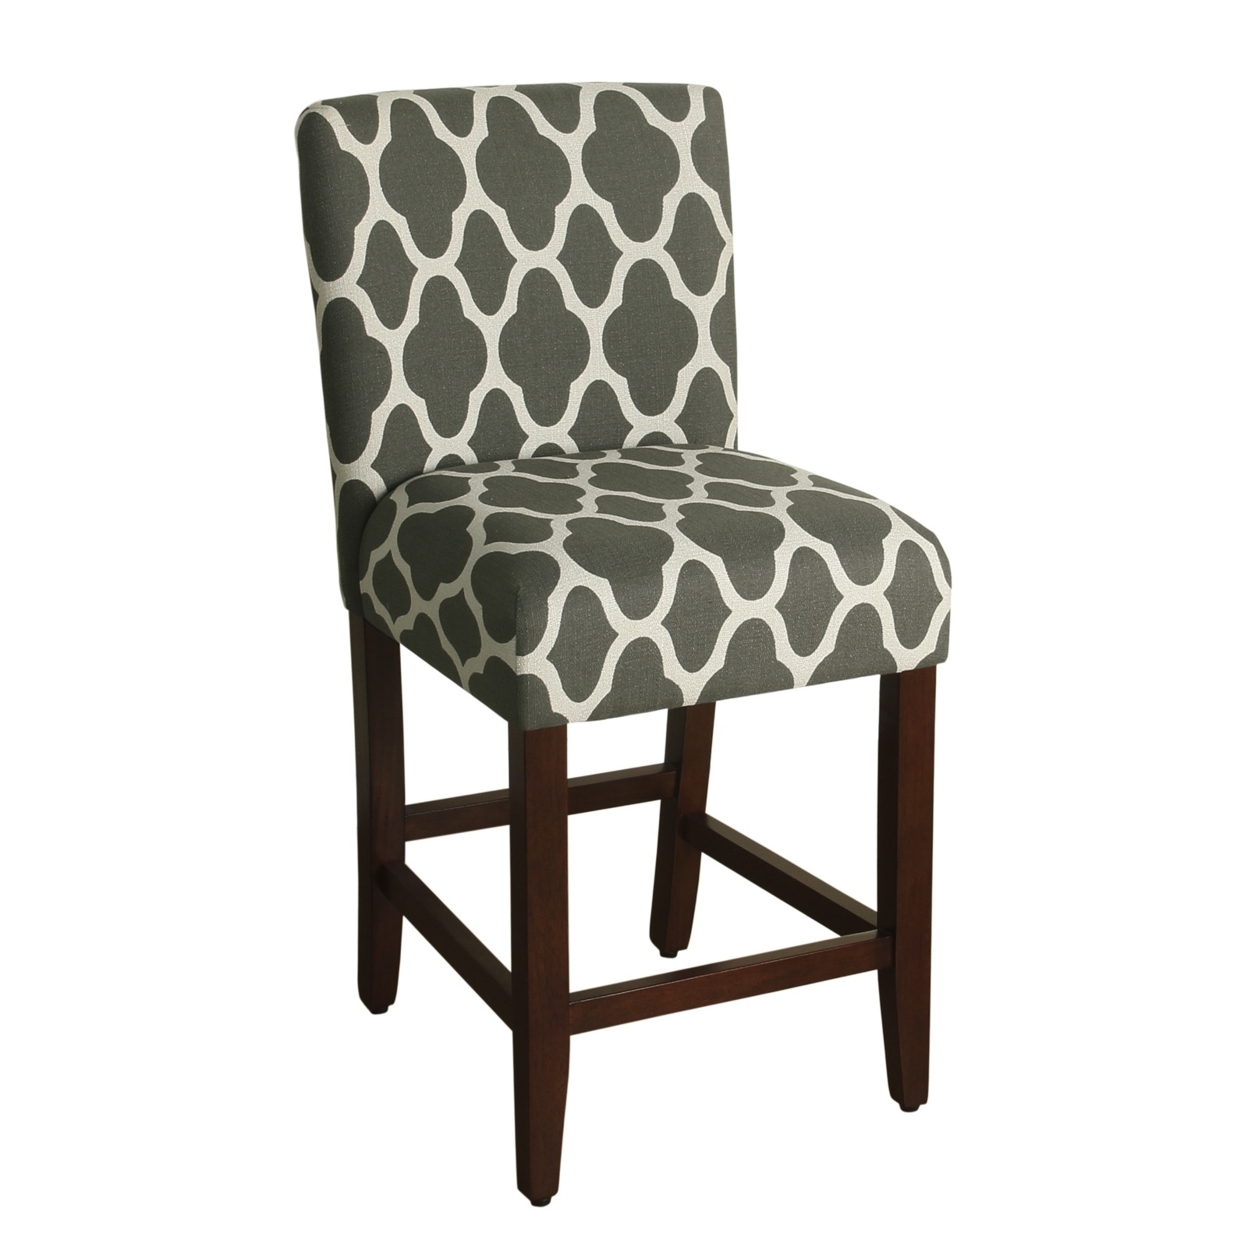 Wooden 24 Inch Counter Height Stool With Quatrefoil Pattern Fabric Upholstery, Gray And White- Saltoro Sherpi